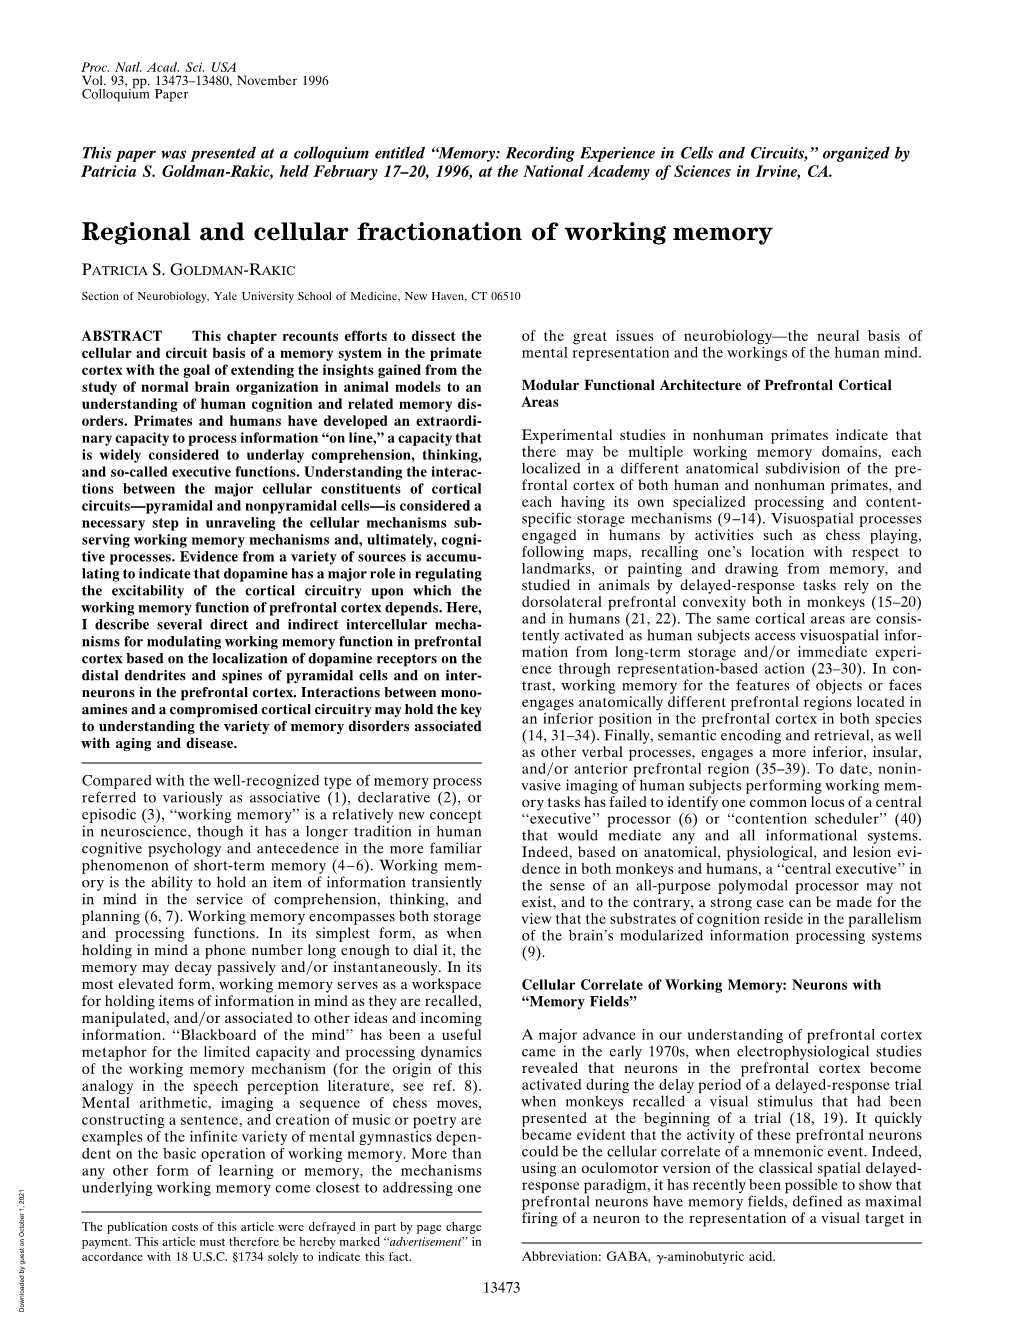 Regional and Cellular Fractionation of Working Memory